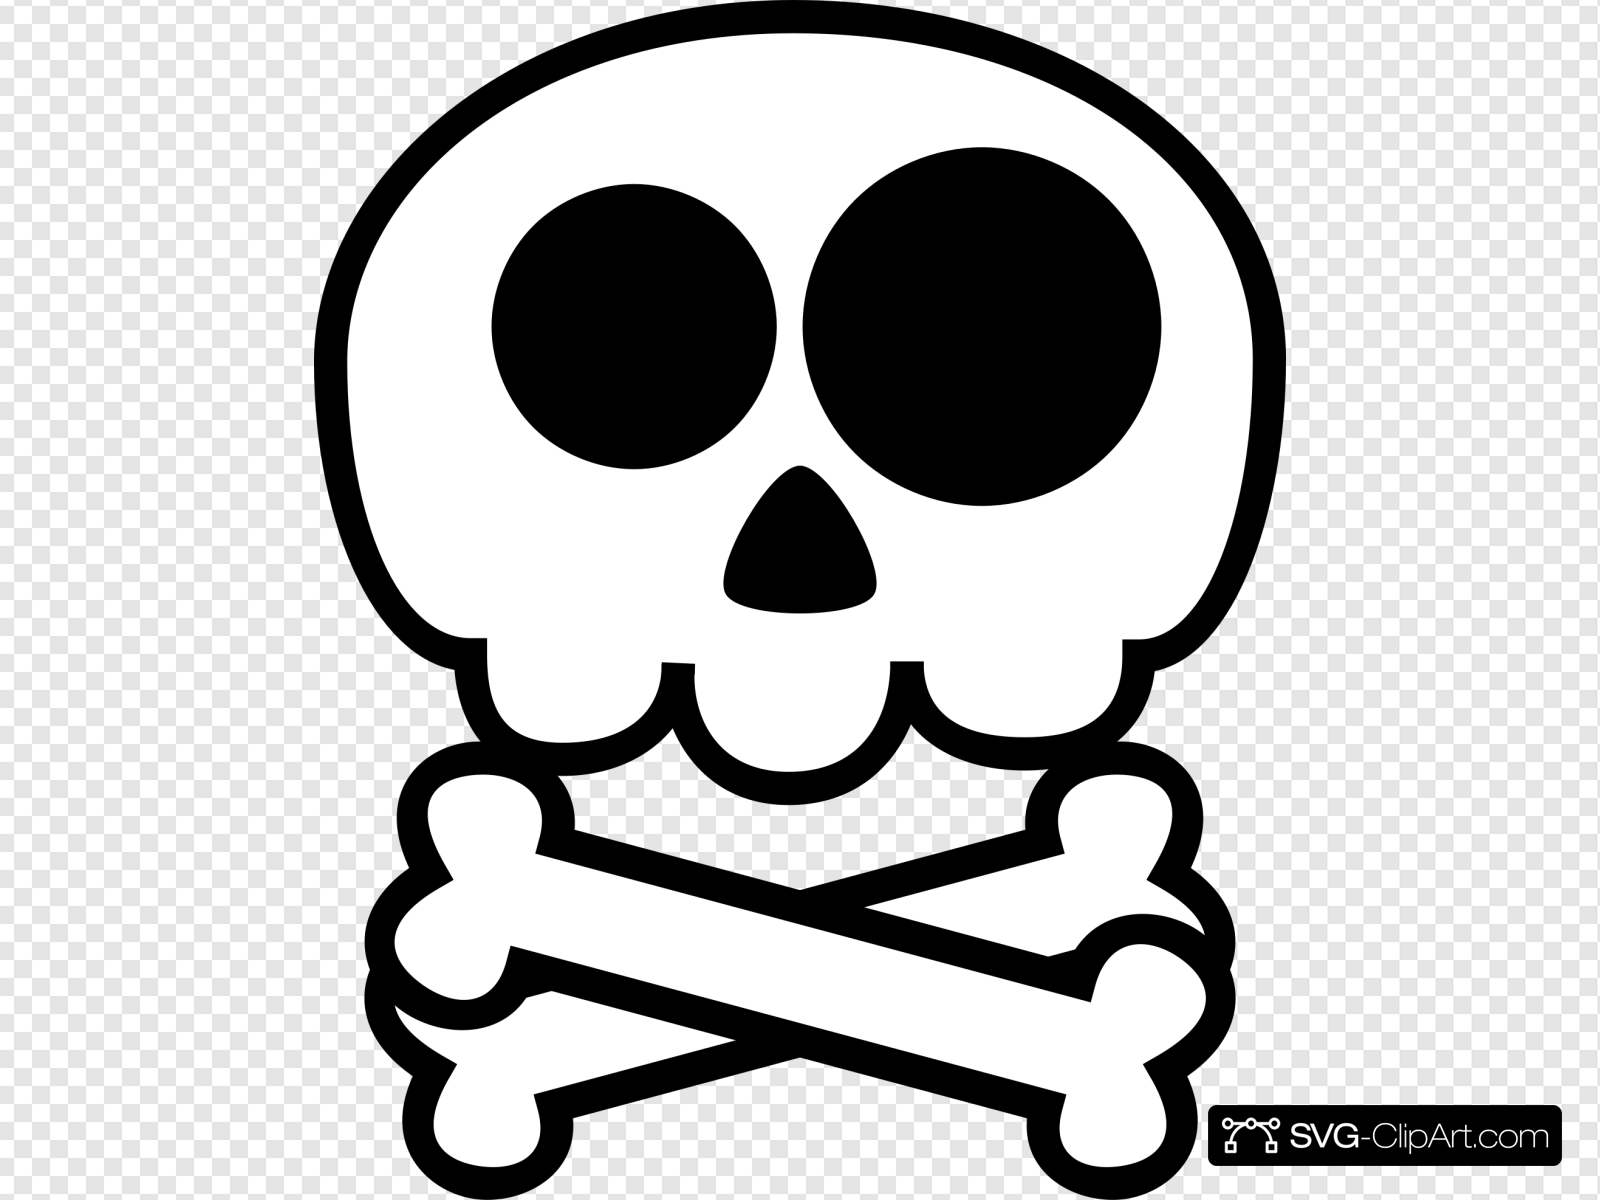 Cute Skull And Crossbones Clip art, Icon and SVG.